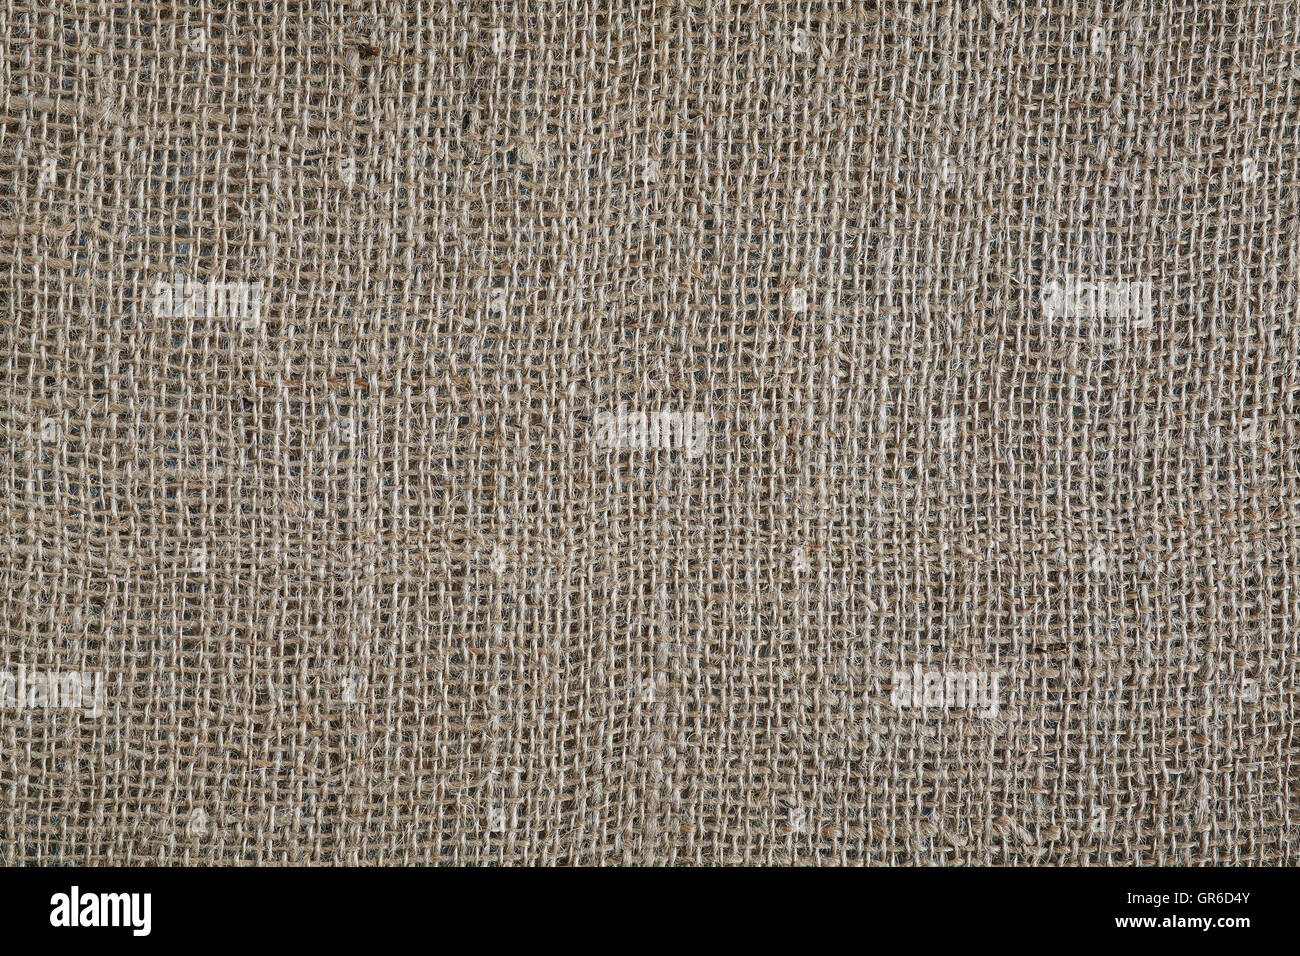 Close up picture of natural linen texture or background. Stock Photo